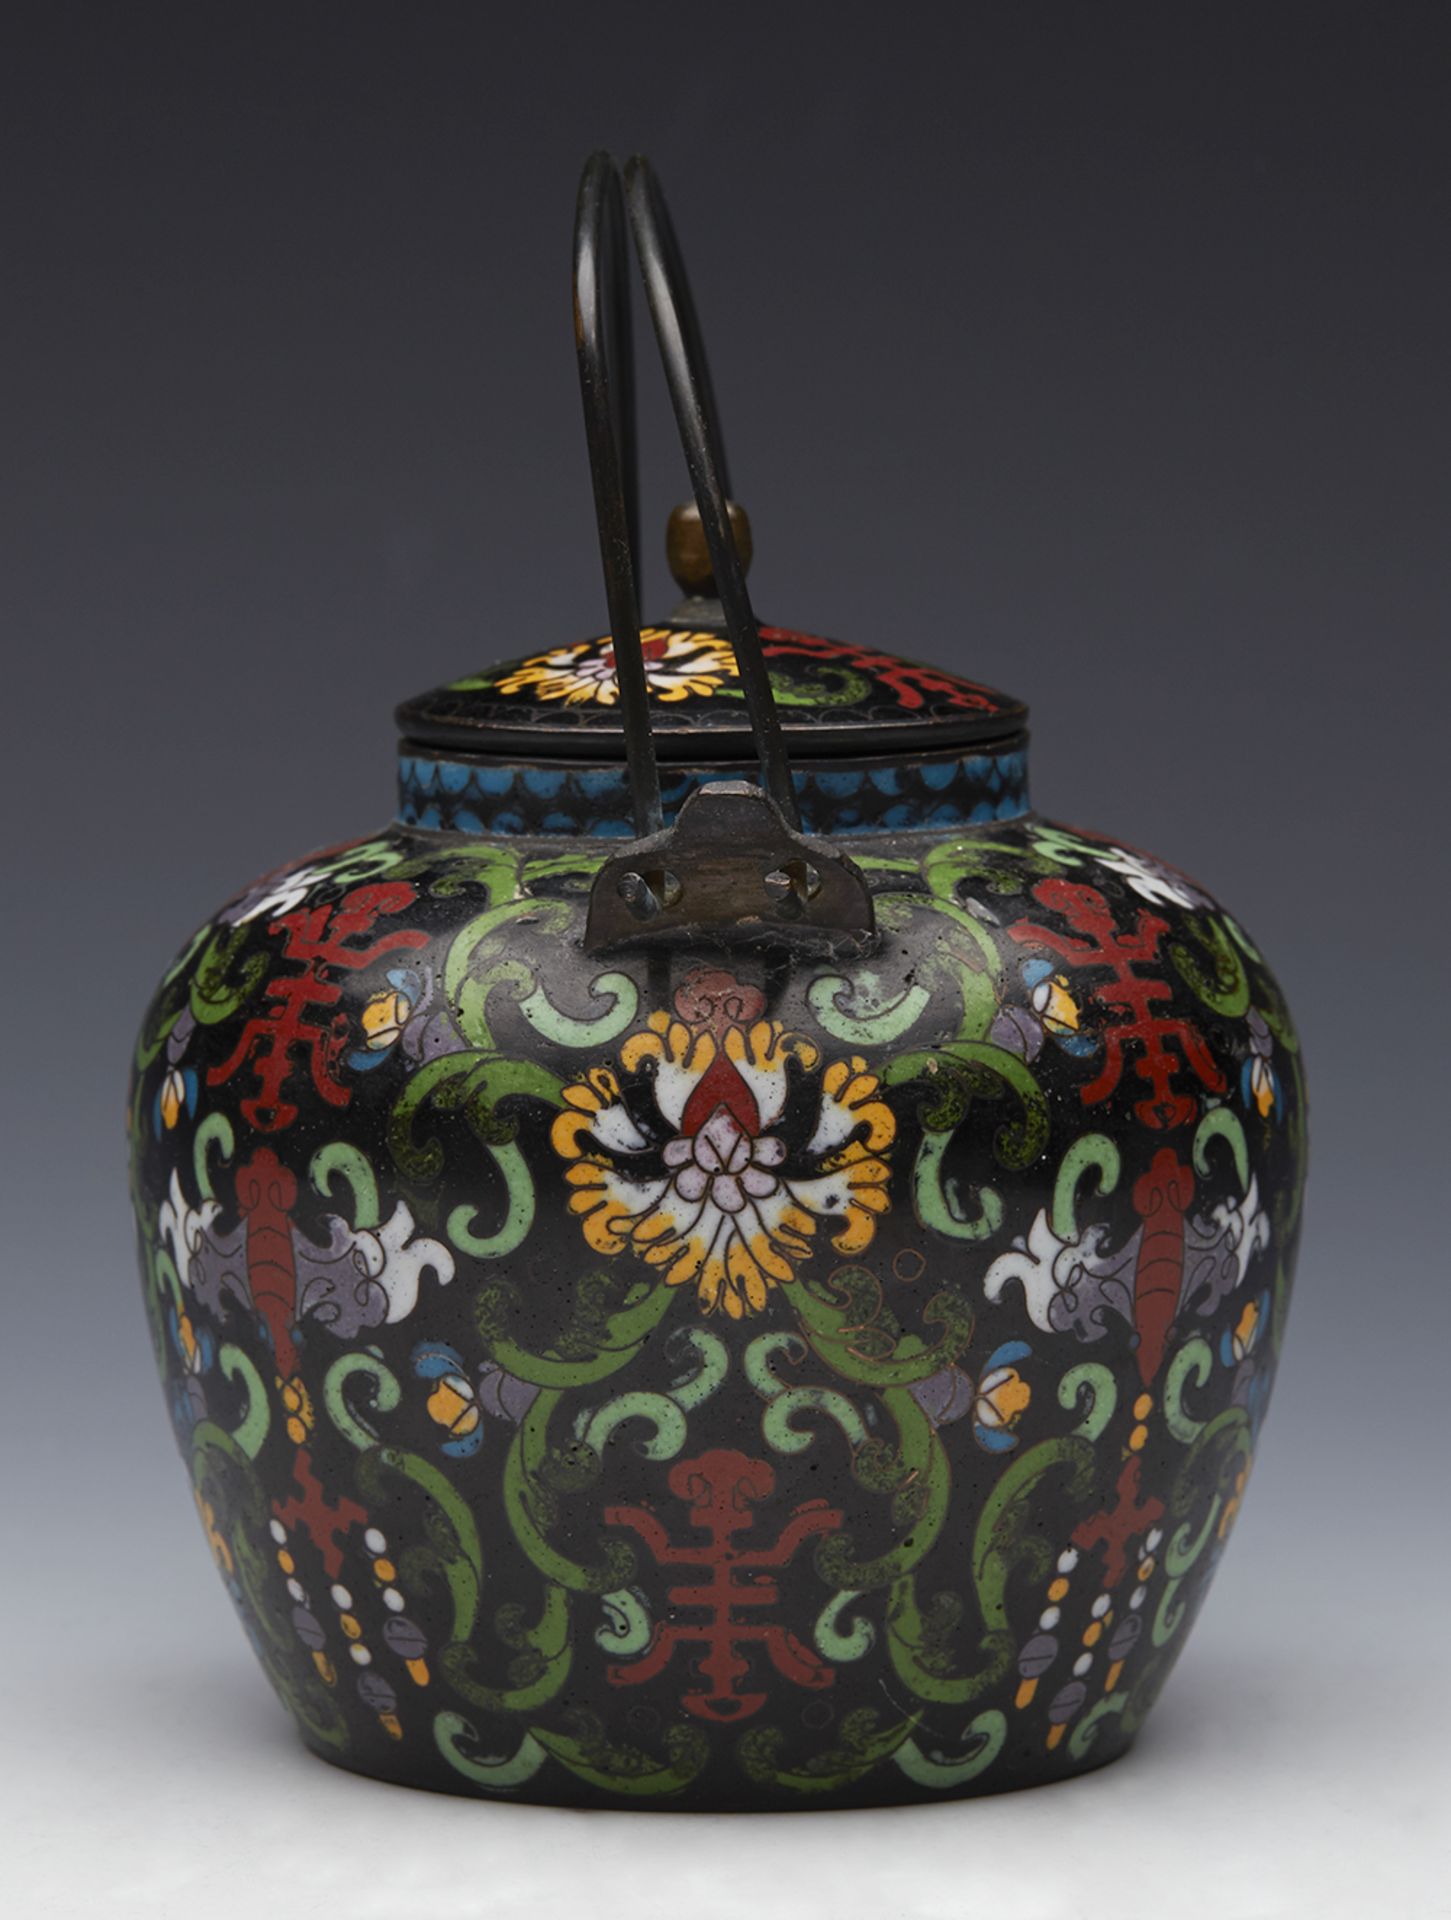 Fine Antique Chinese Qing Cloisonne Wine Pot Marked Tong Shun Tang 19Th C. - Image 9 of 10